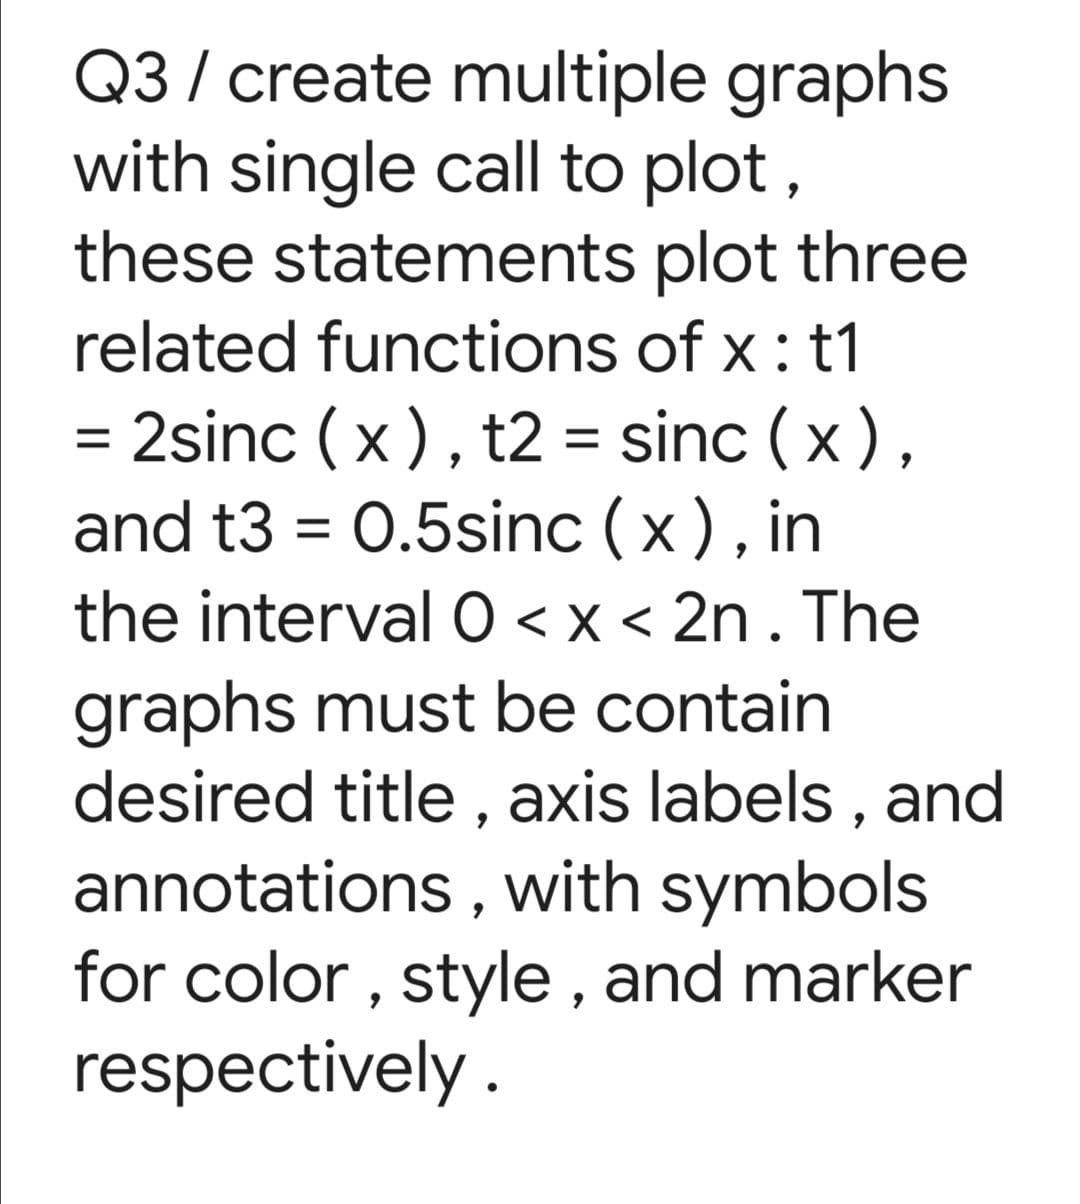 Q3 / create multiple graphs
with single call to plot,
these statements plot three
related functions of x : t1
= 2sinc (x), t2 = sinc (x),
and t3 = 0.5sinc (x), in
the interval O < x < 2n . The
graphs must be contain
desired title , axis labels , and
annotations , with symbols
for color , style , and marker
respectively.
